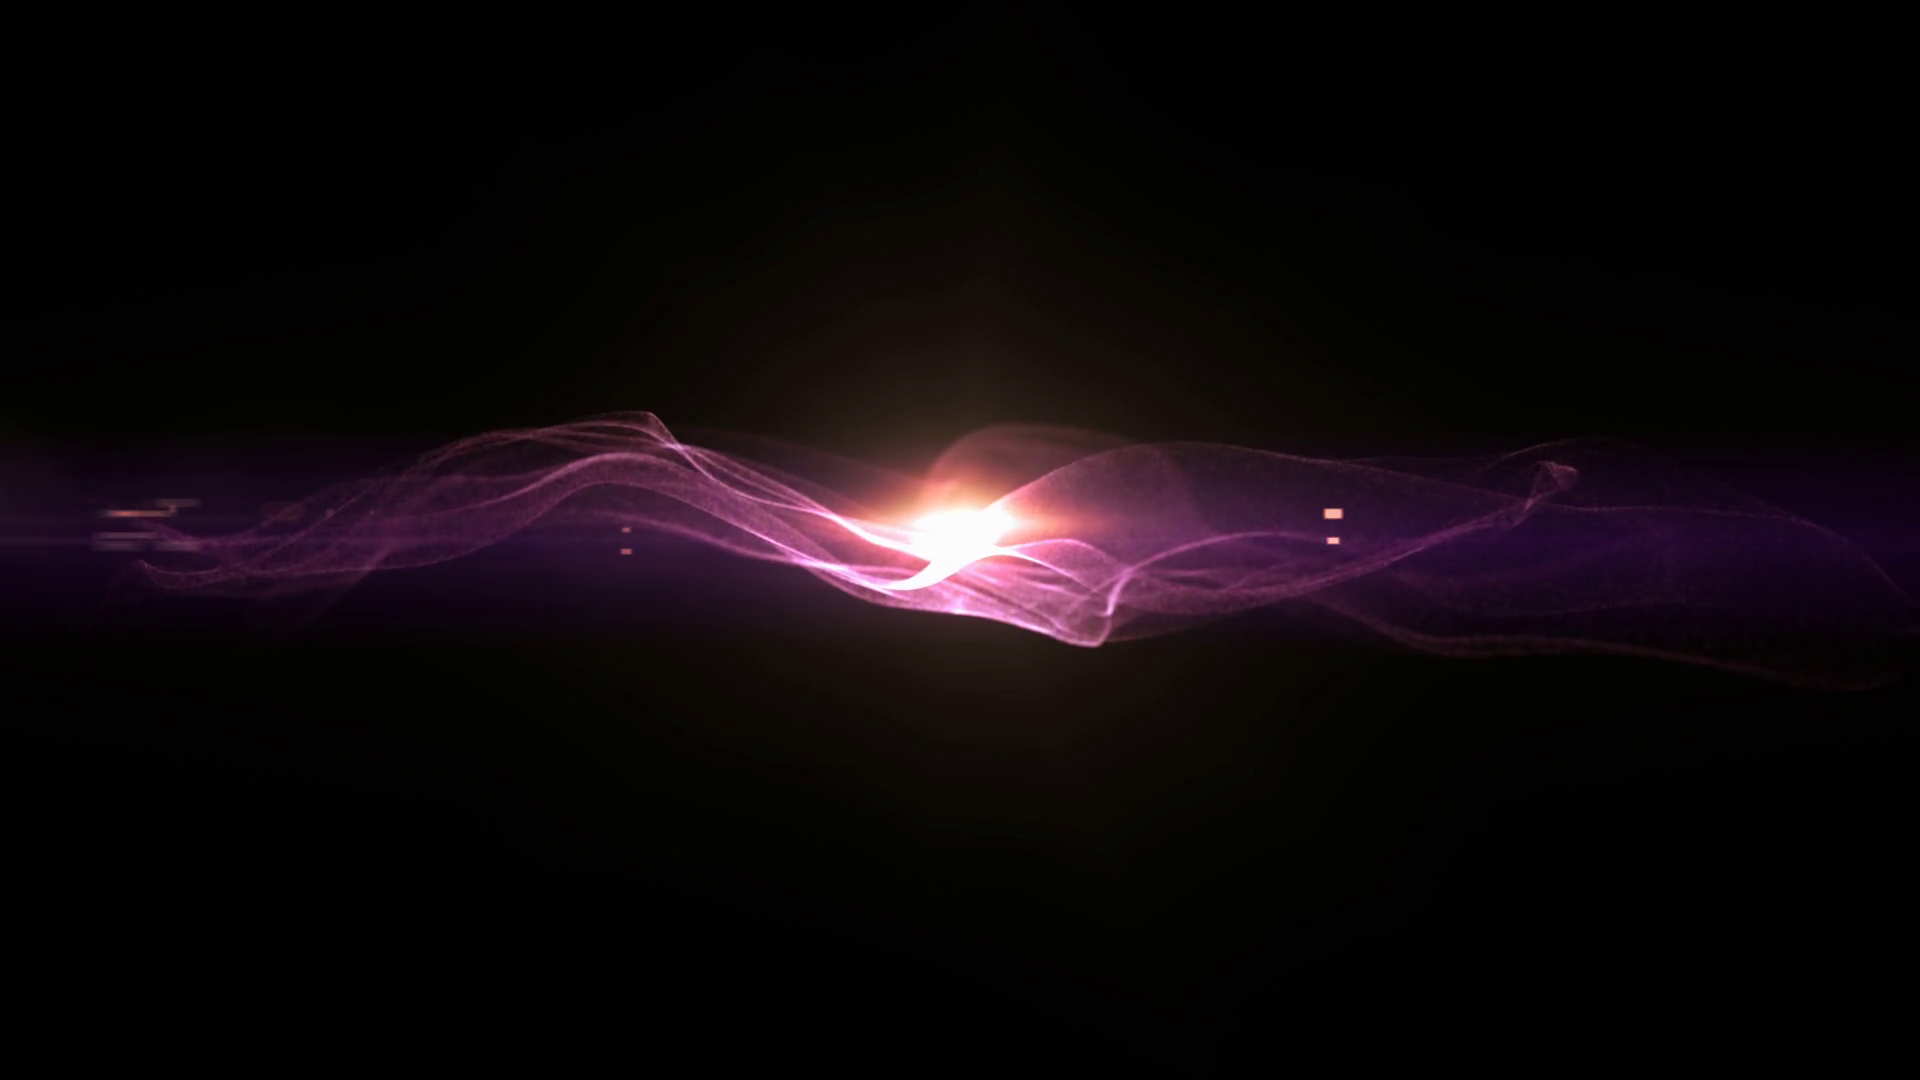 Dark Purple Lines And Energy Motion Background 00:20 SBV 300197656